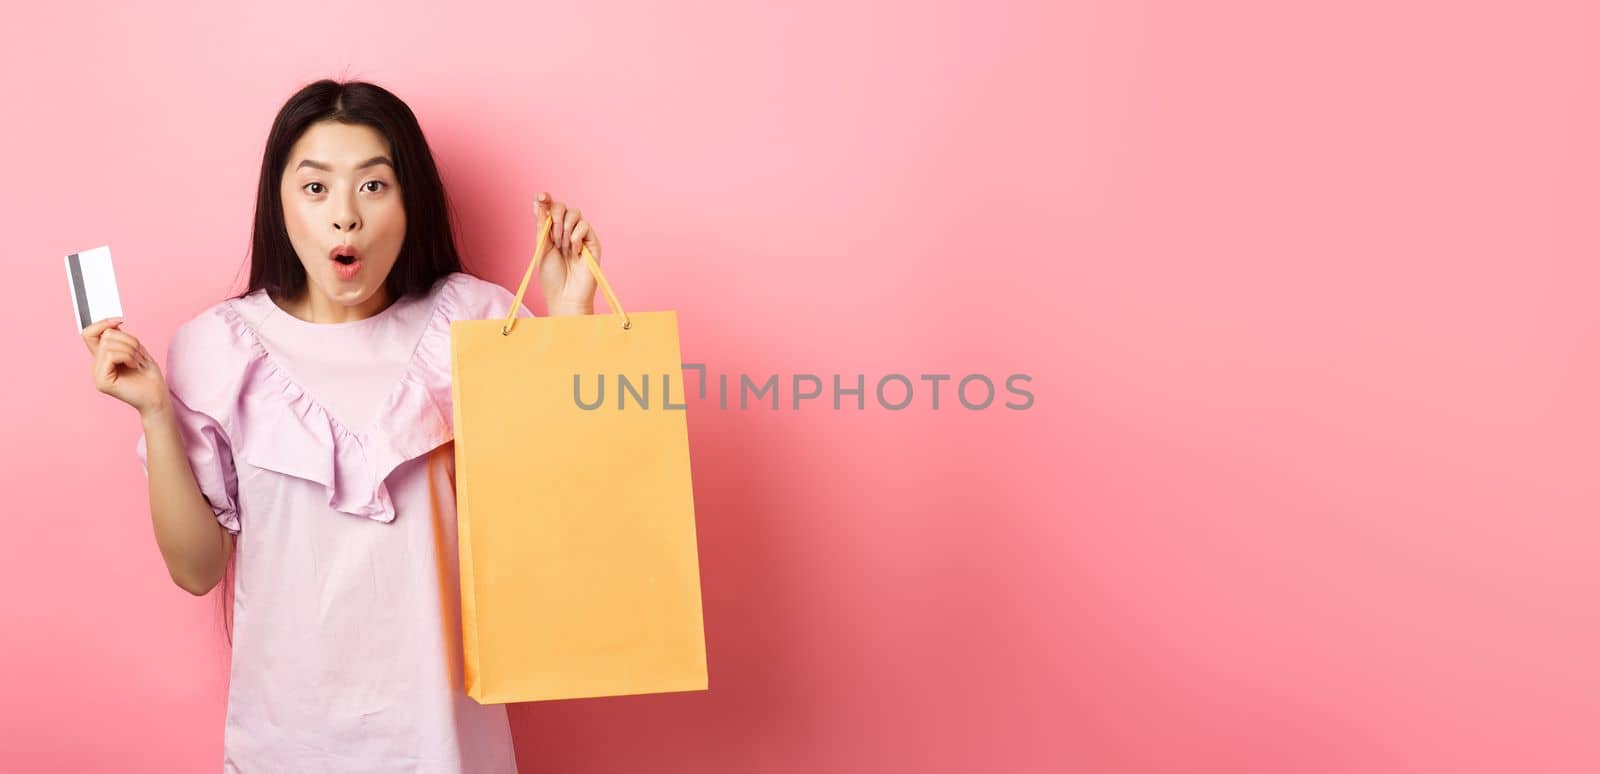 Shopping. Excited asian woman gasping amazed, holding bag from shop and plastic credit card, standing on pink background.